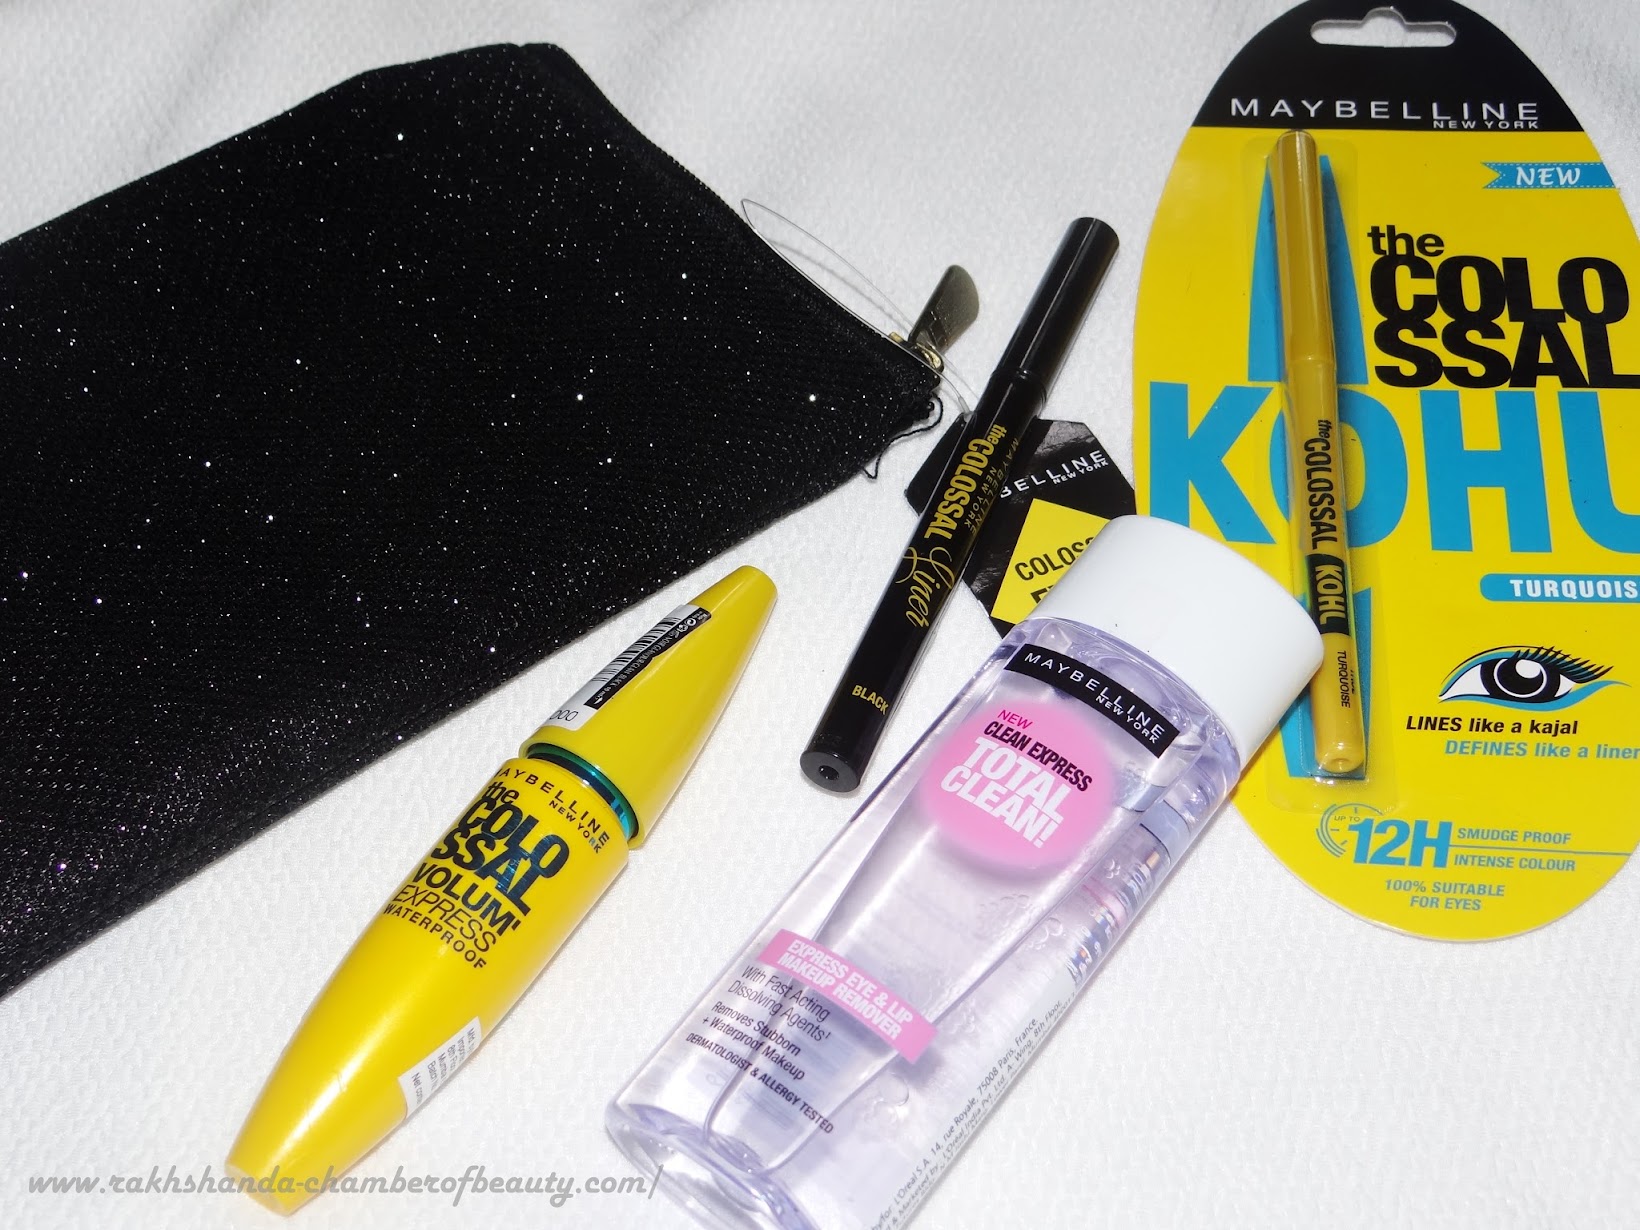 Maybelline NY Colossal Eye Kit- review, swatches, price in India, Colossal kohl, Colossal mascara, Colossal eyeliner, Clean express Makeup remover, Indian beauty blogger